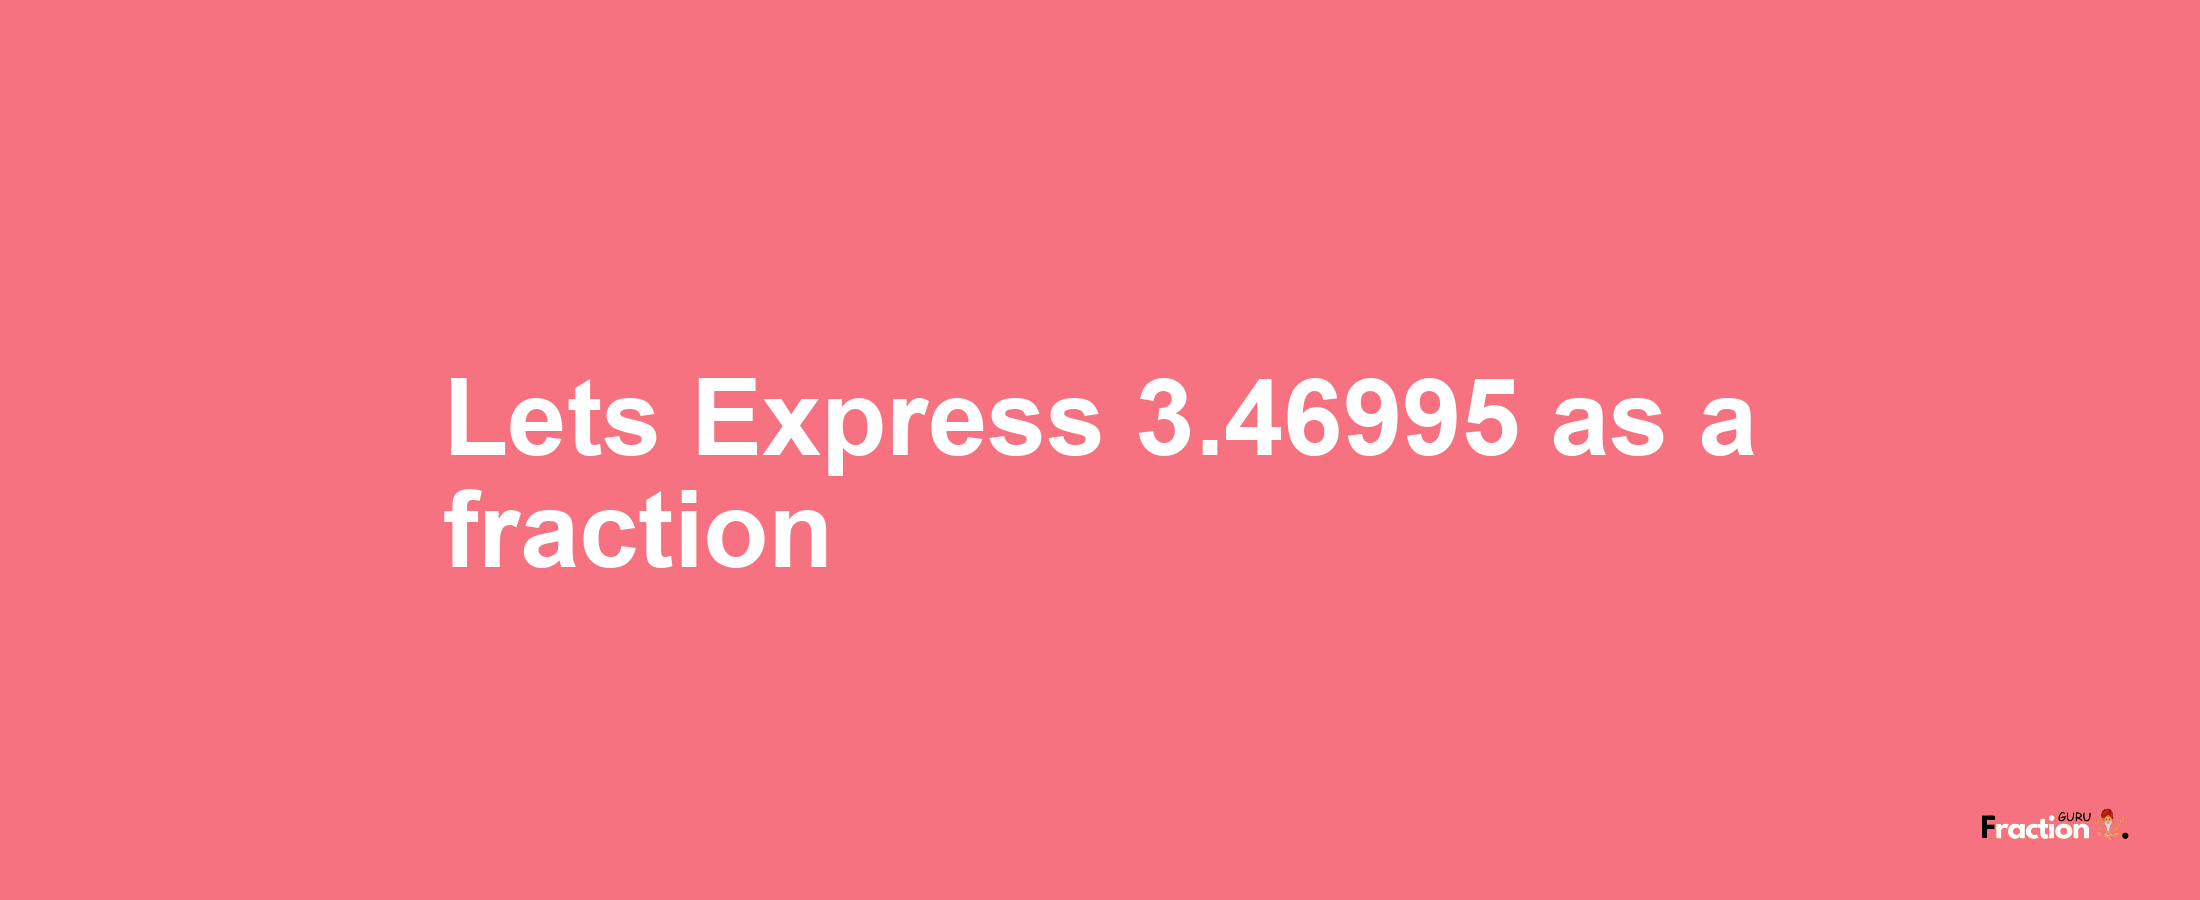 Lets Express 3.46995 as afraction